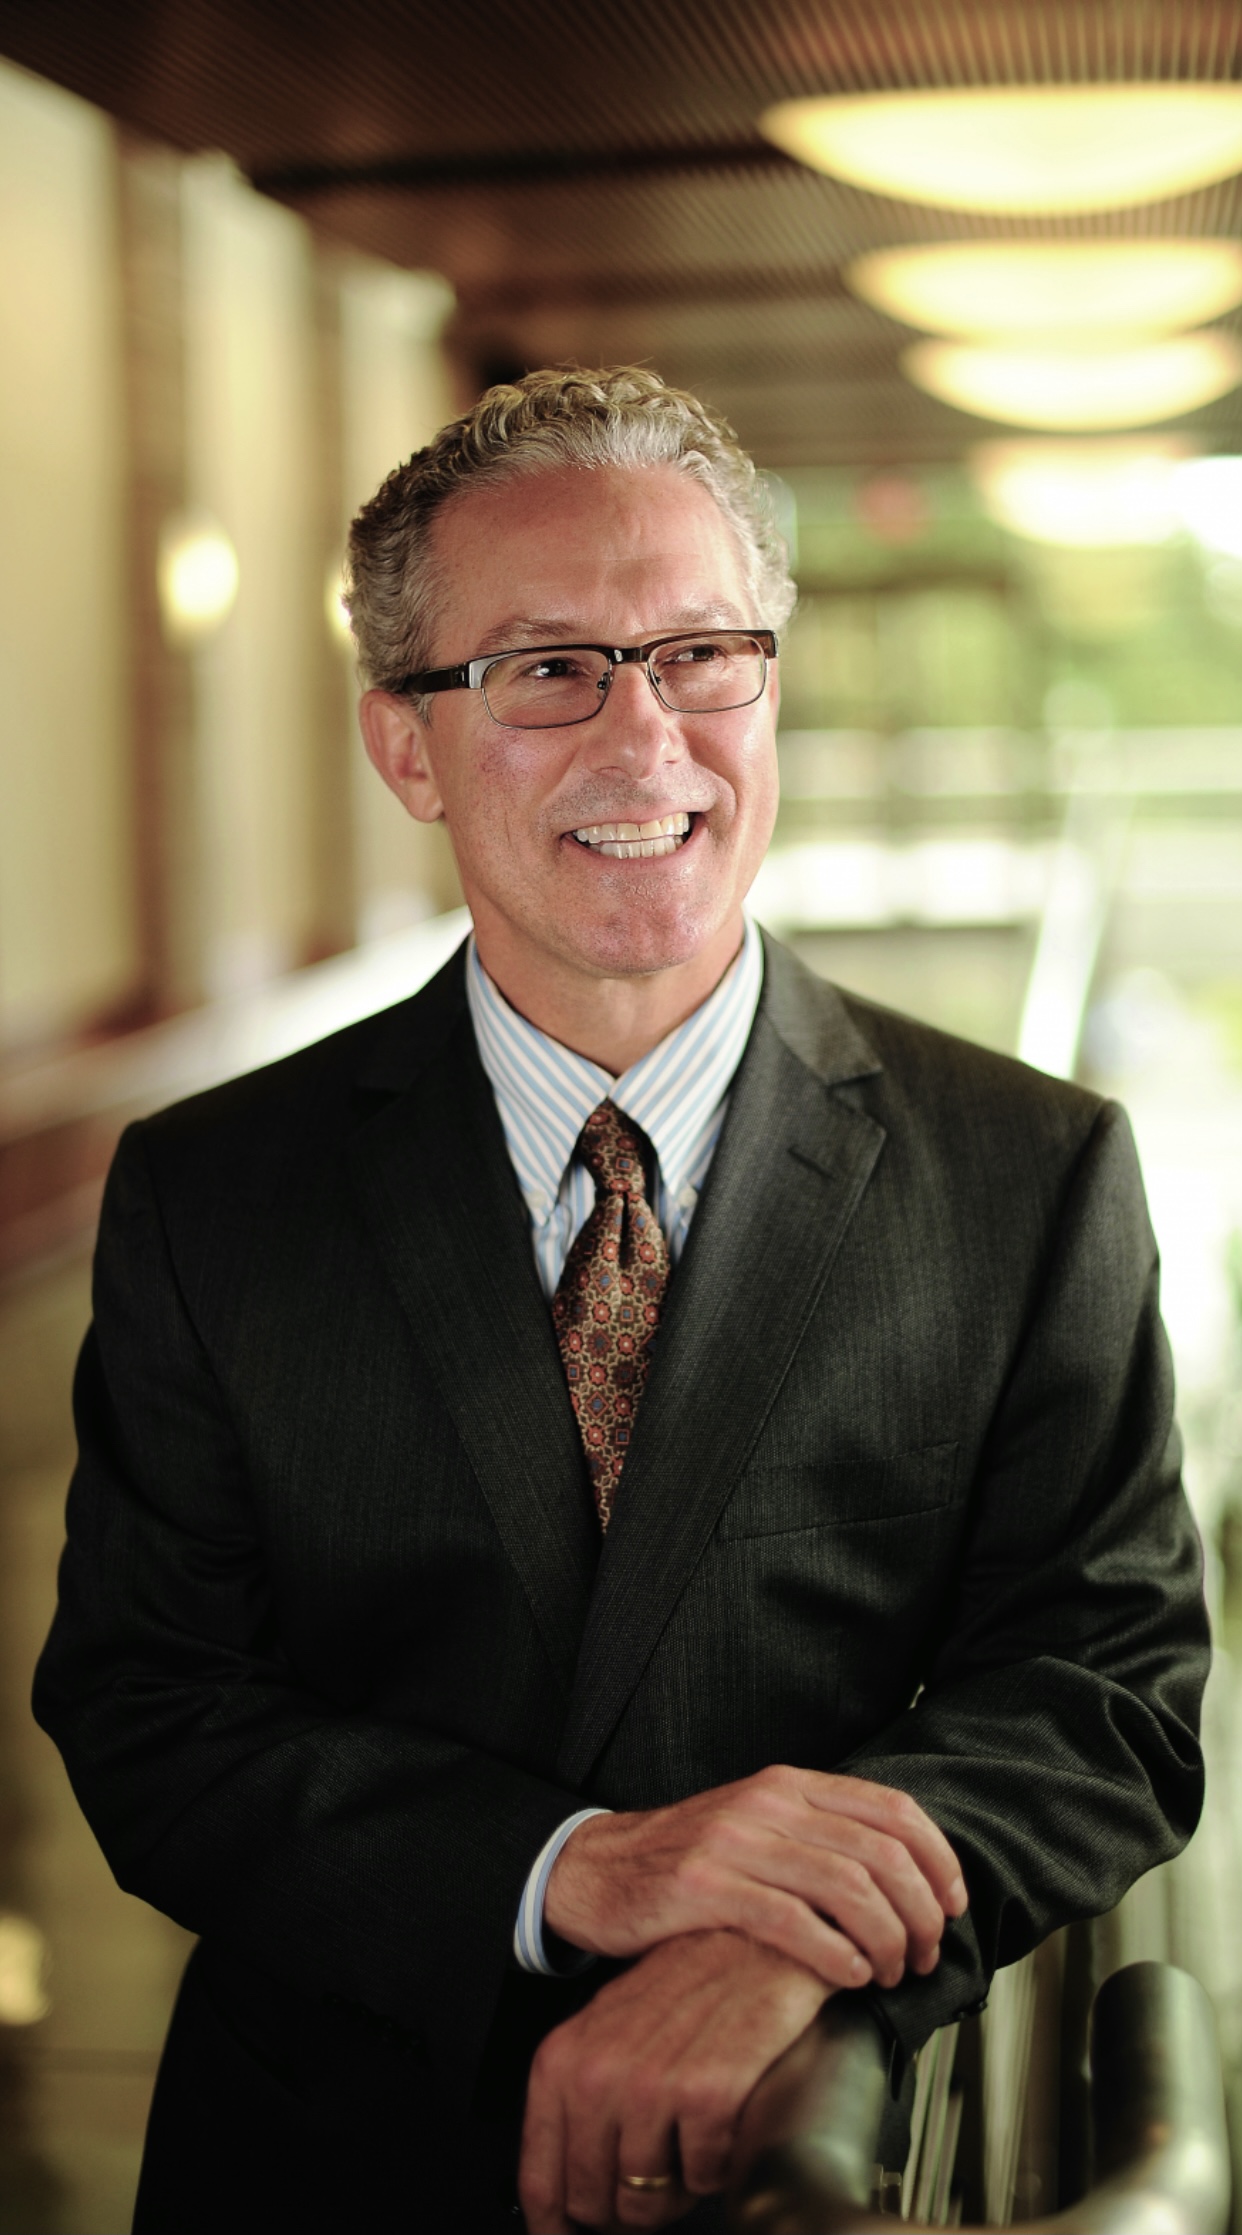 A portrait of Rich Lyons, clean-shaven, in a suit, as dean of Haas School of Business